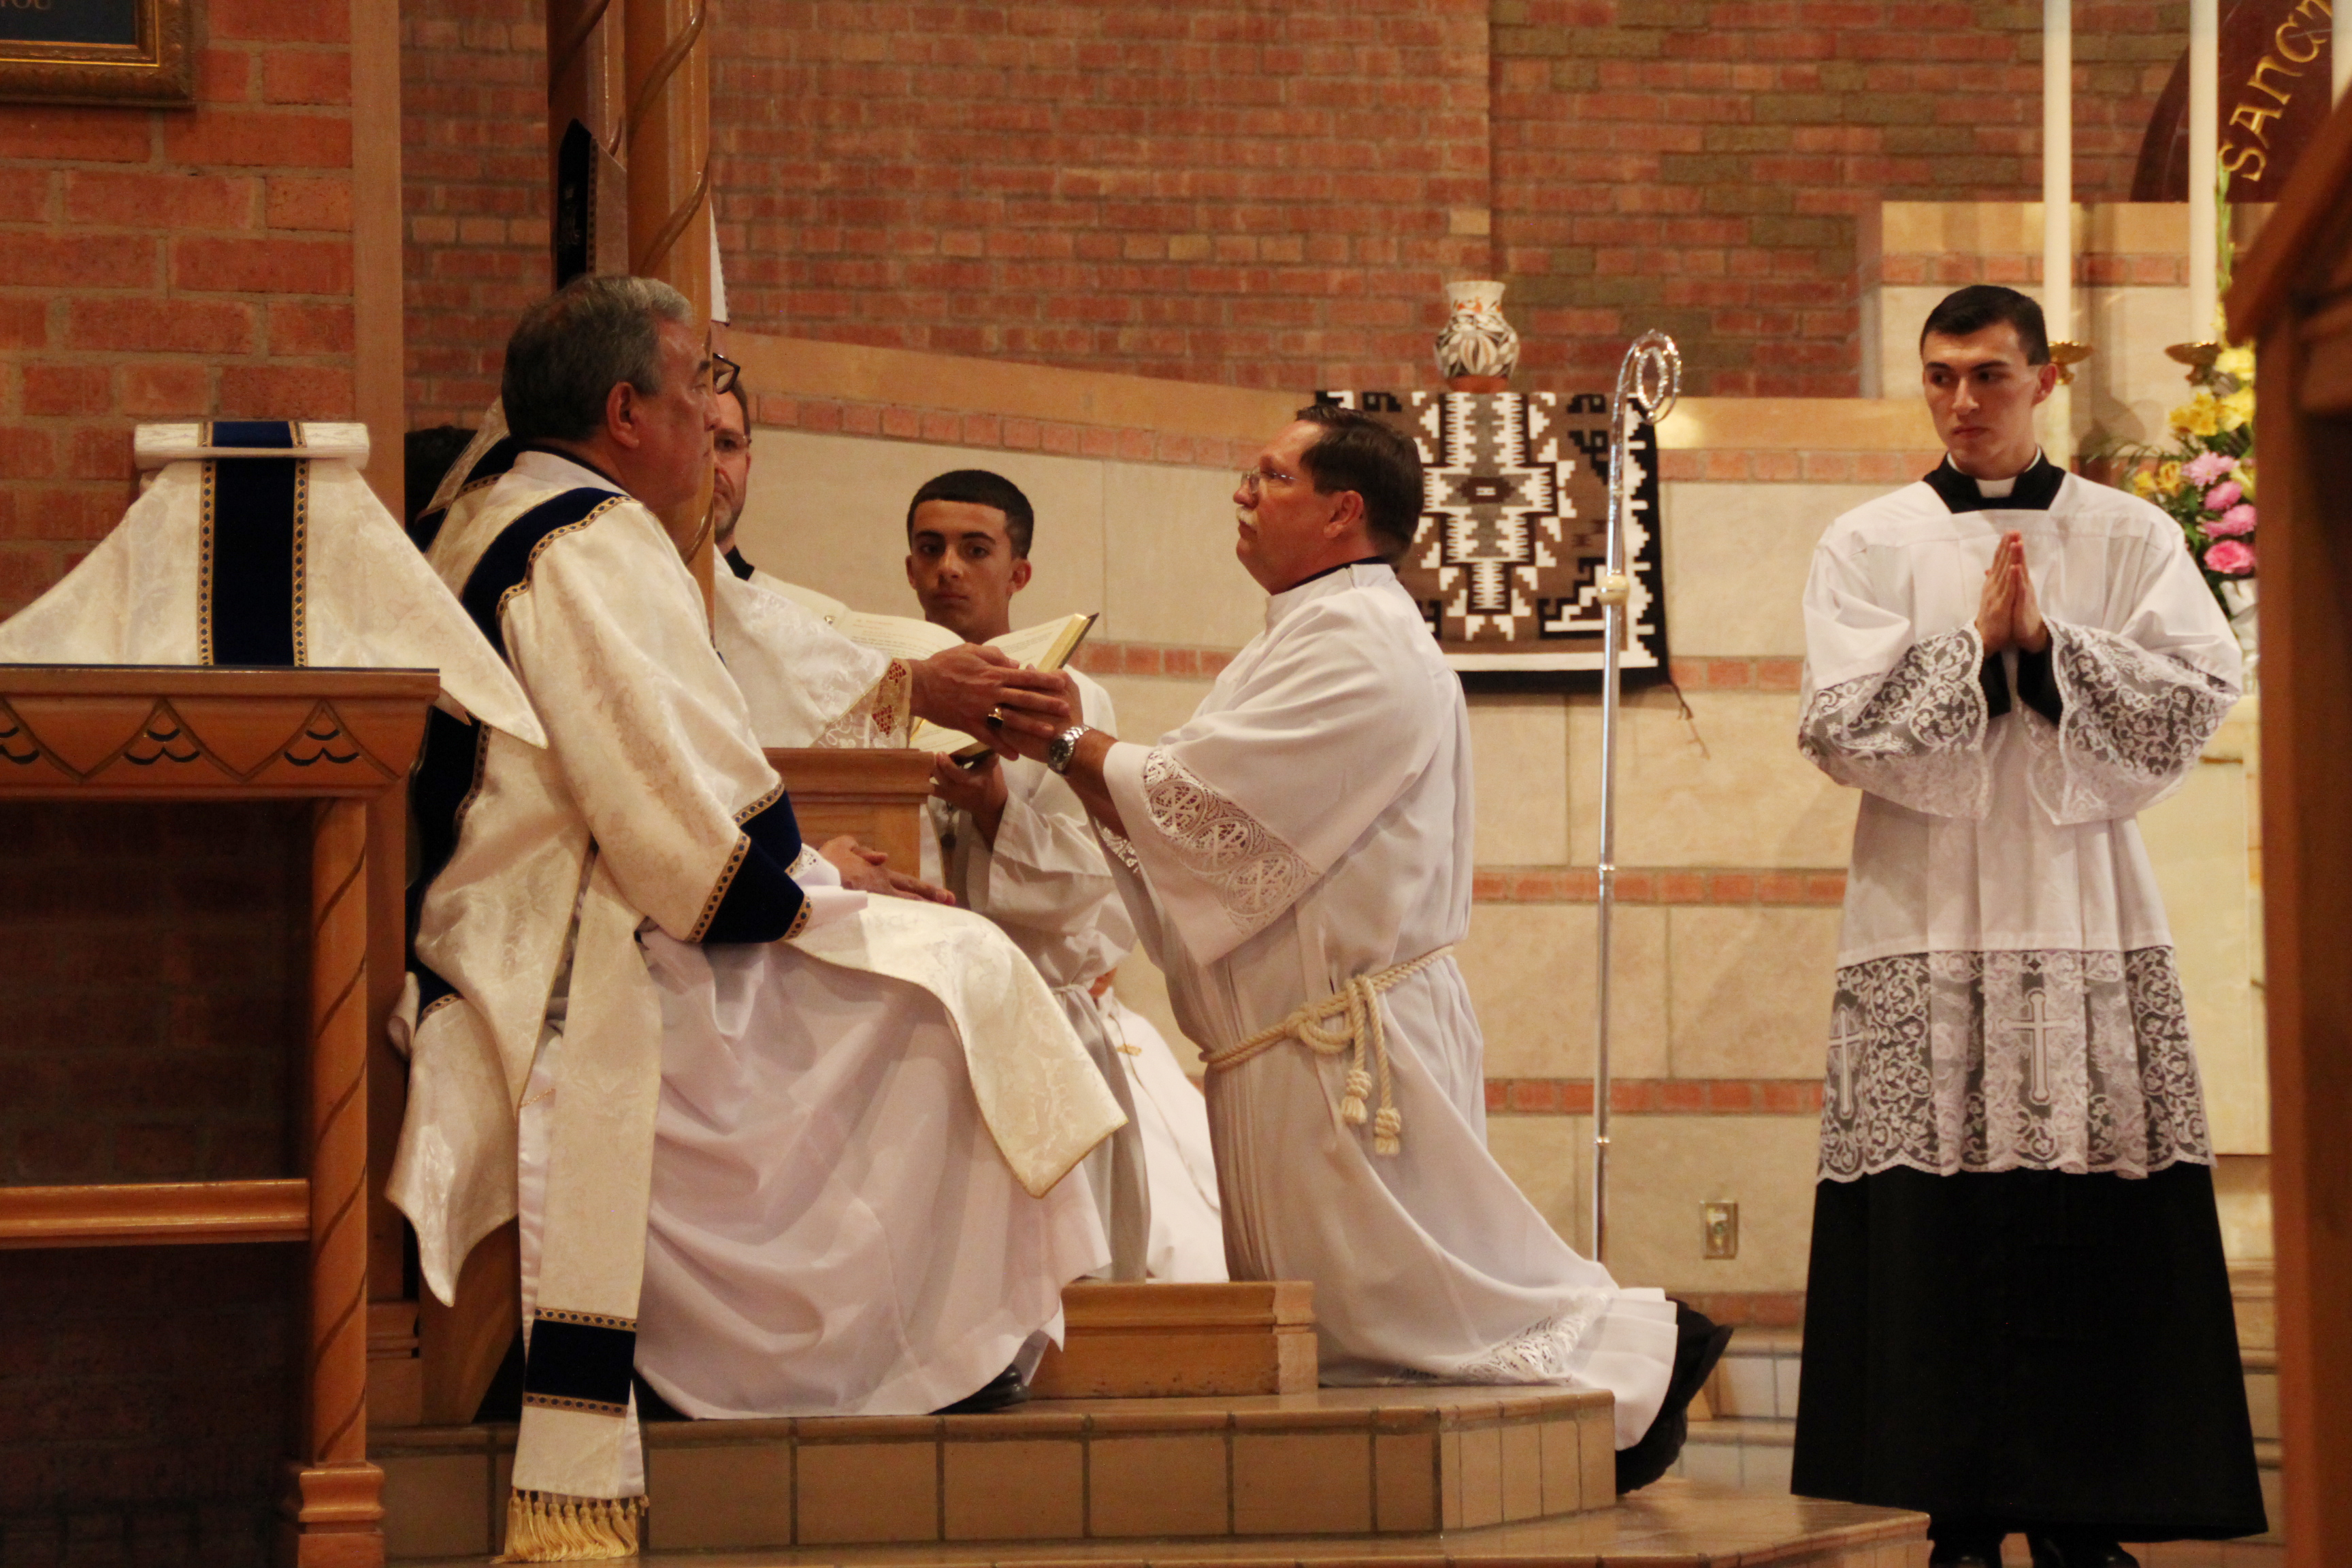 Deacon Todd Church was ordained to the diaconate in 2014.